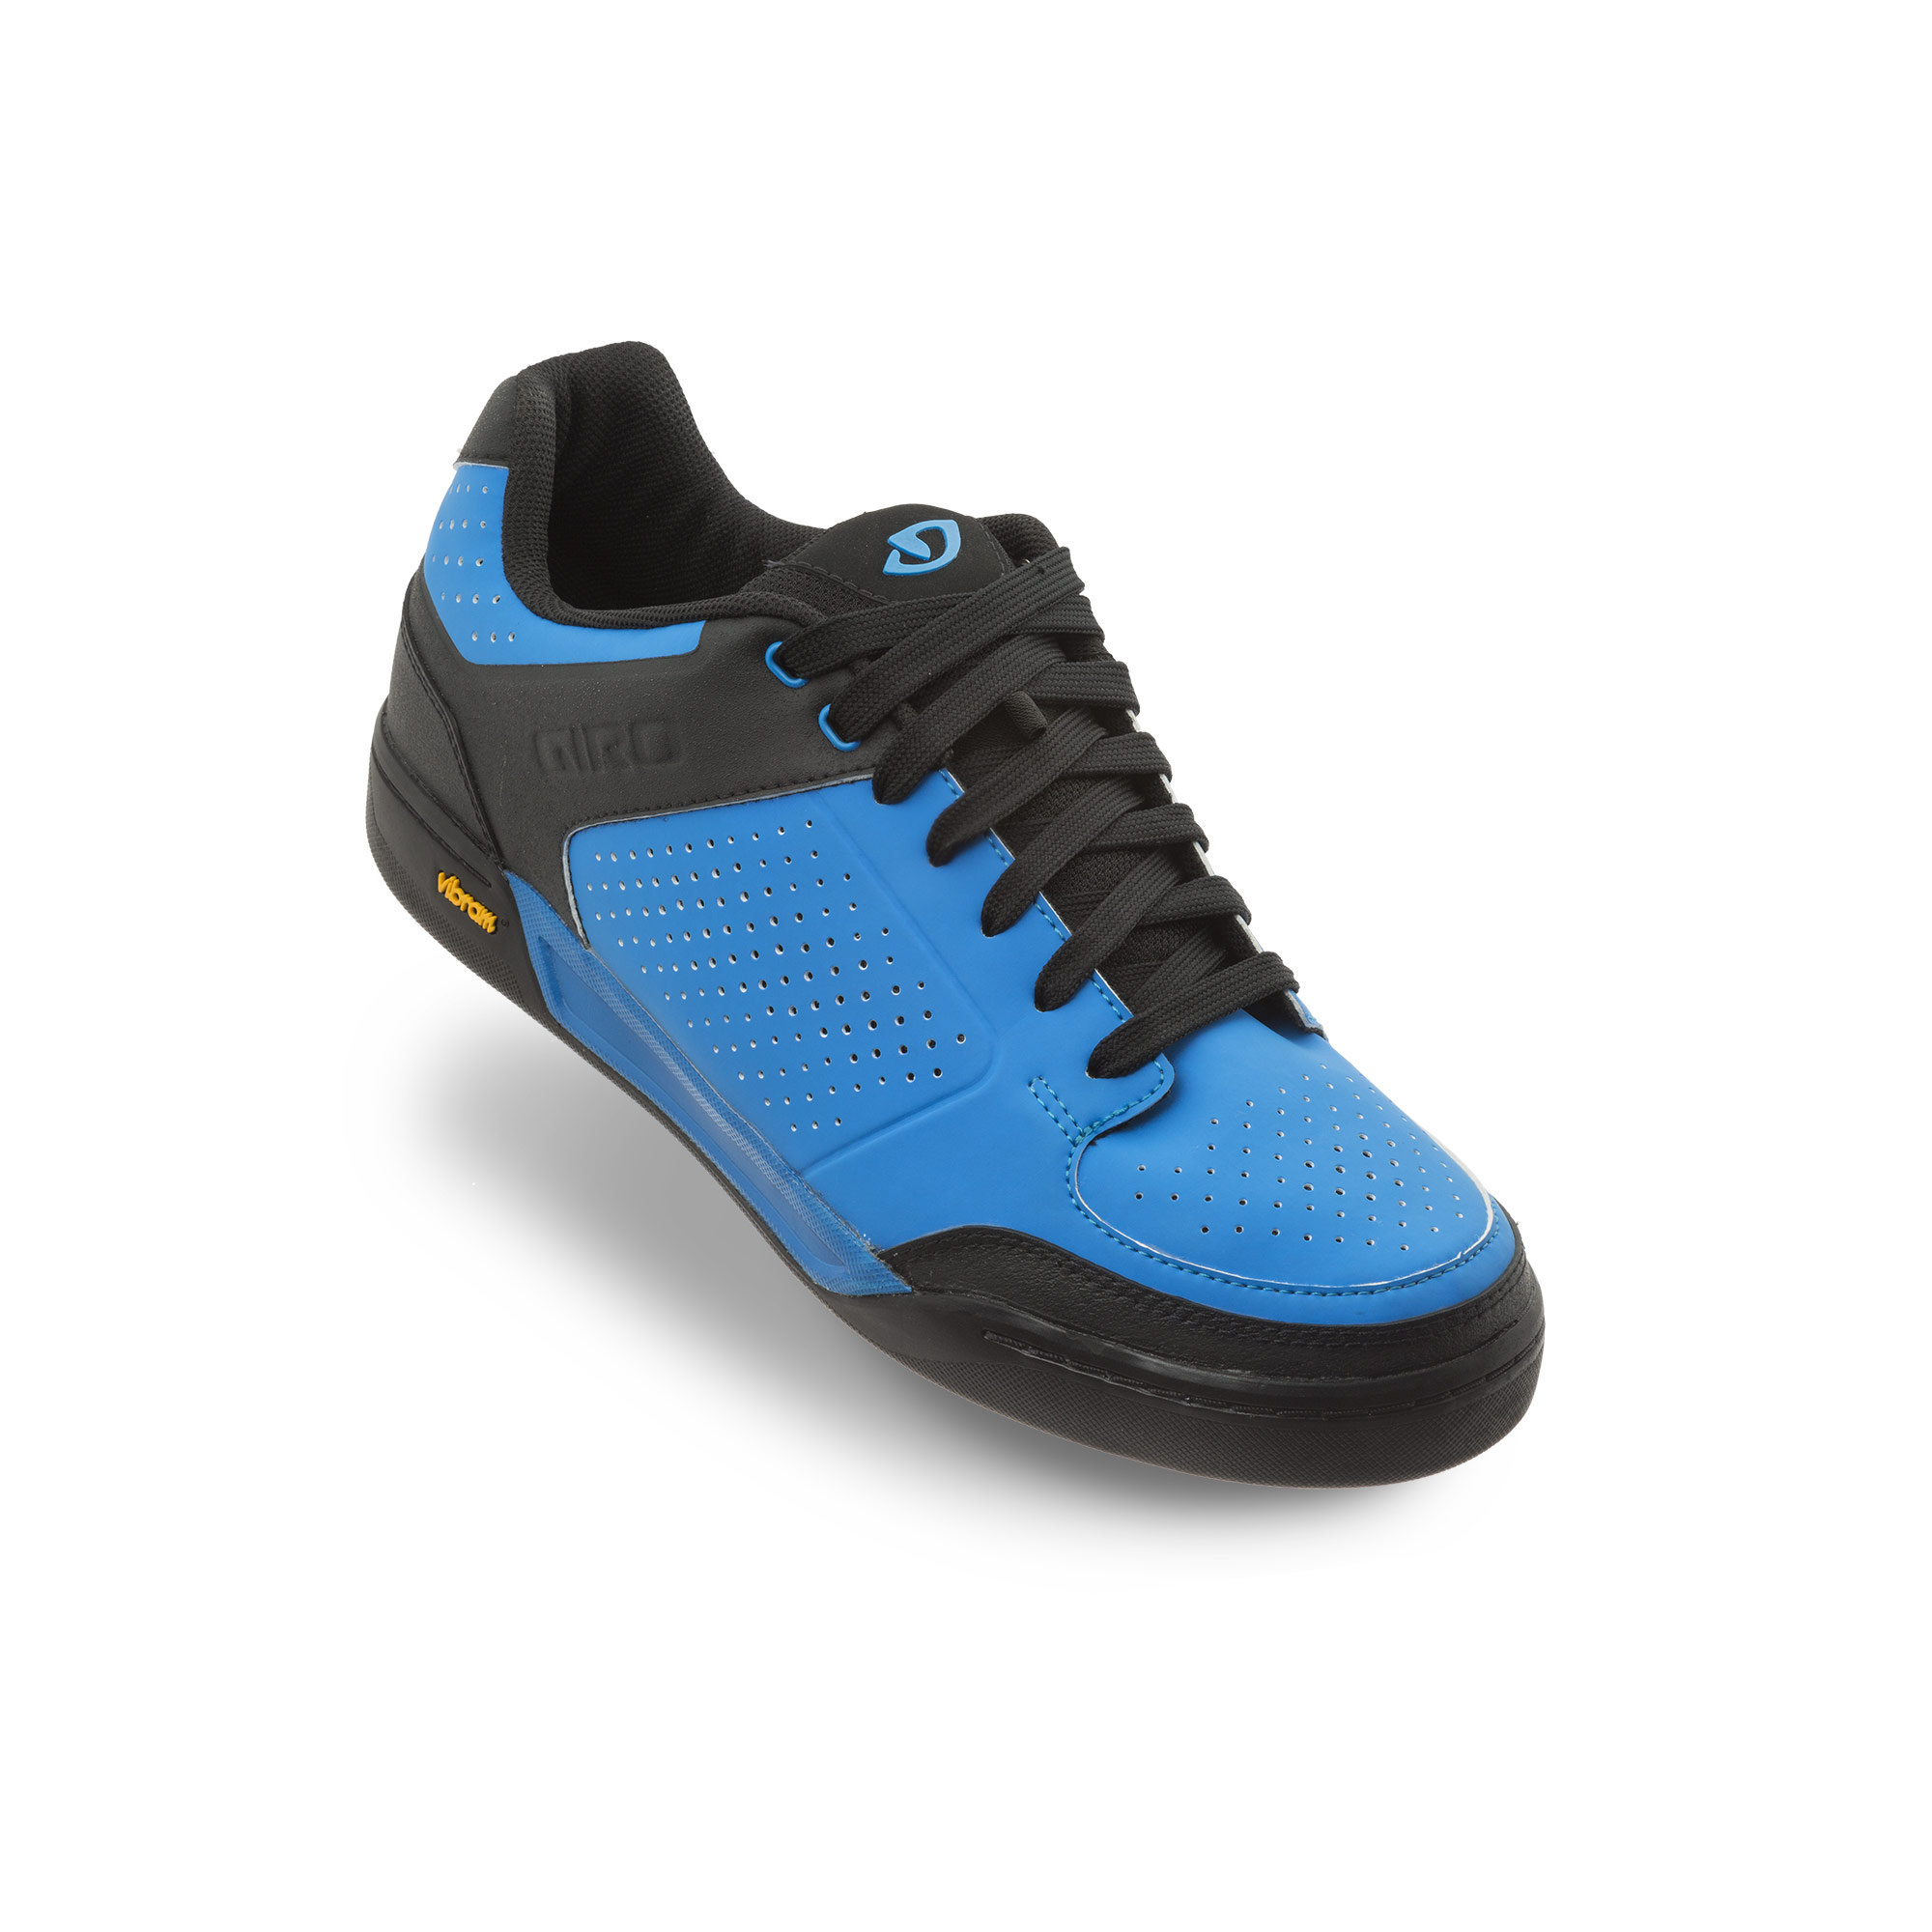 , Giro launches new Riddance and Jacket II flat pedal shoes